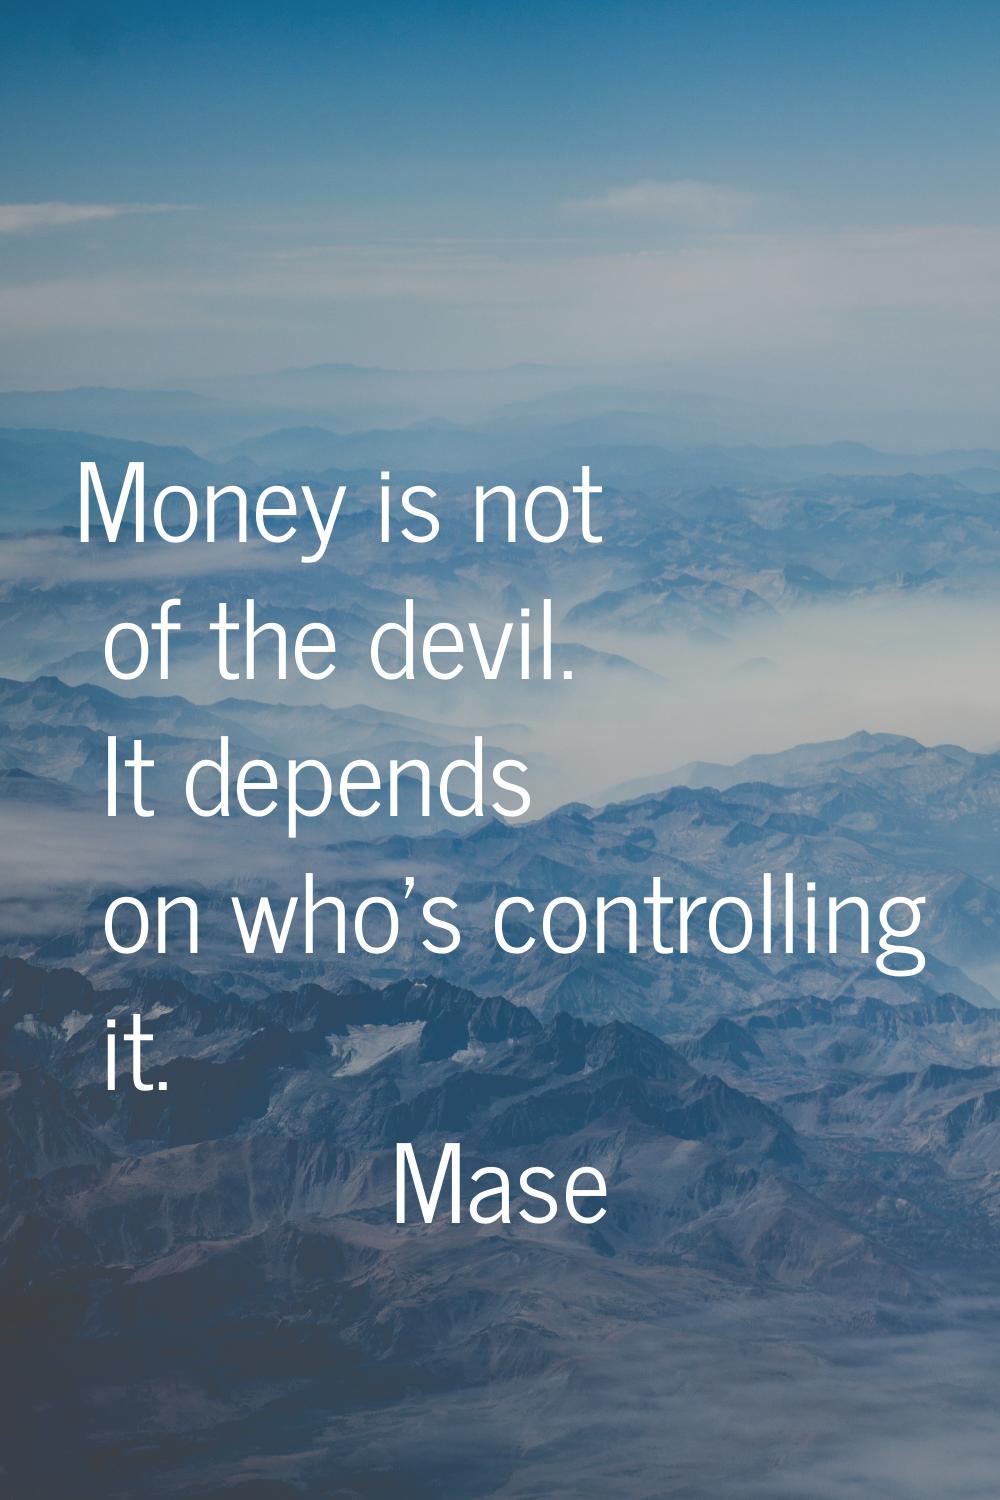 Money is not of the devil. It depends on who's controlling it.